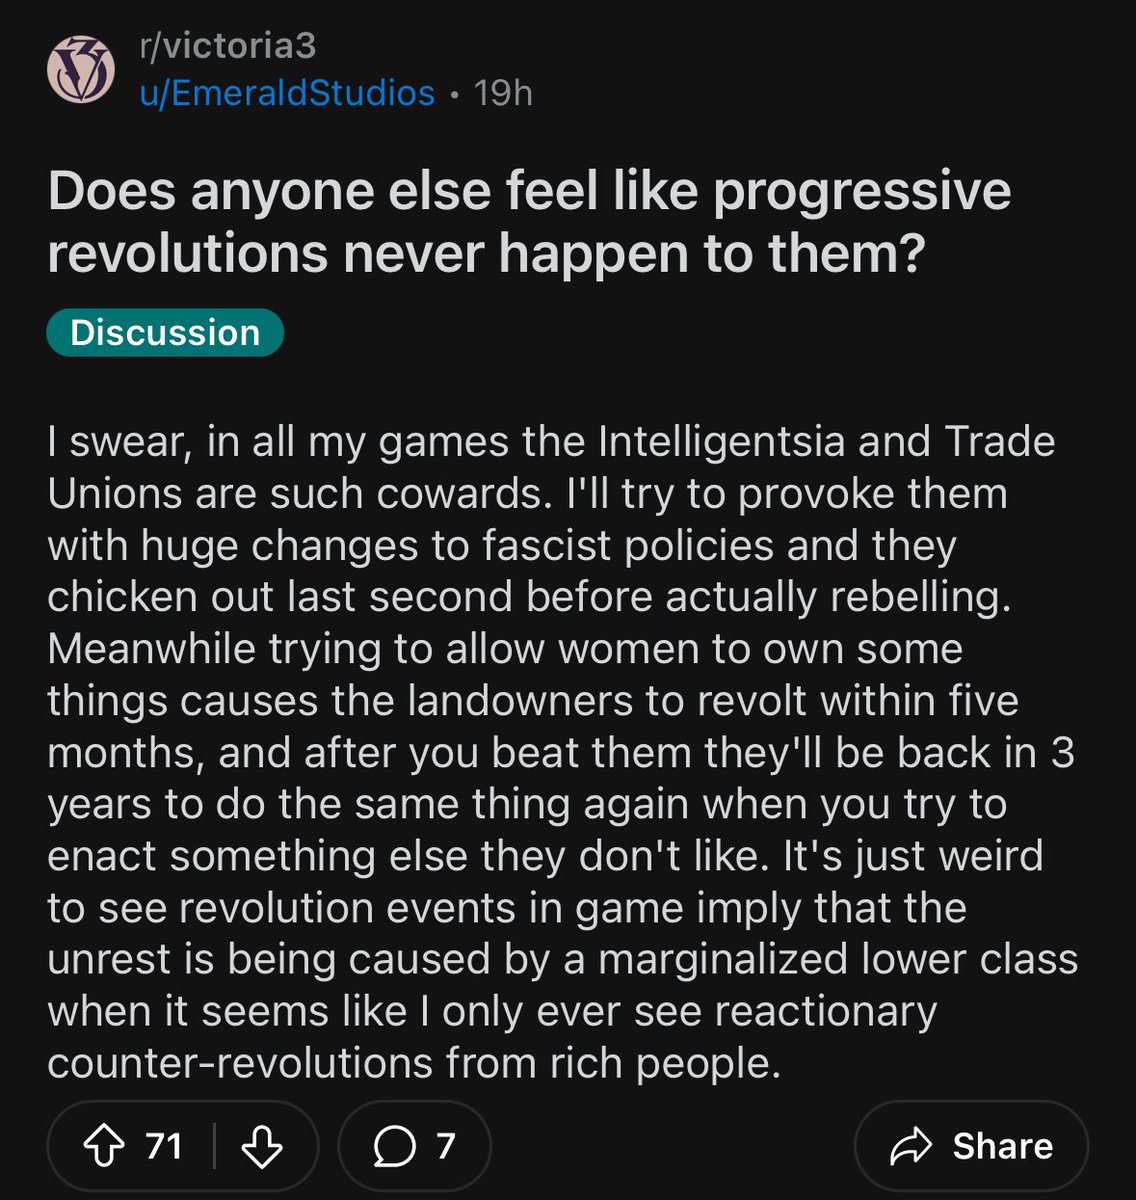 r/victoria3 once again accidentally describing reality